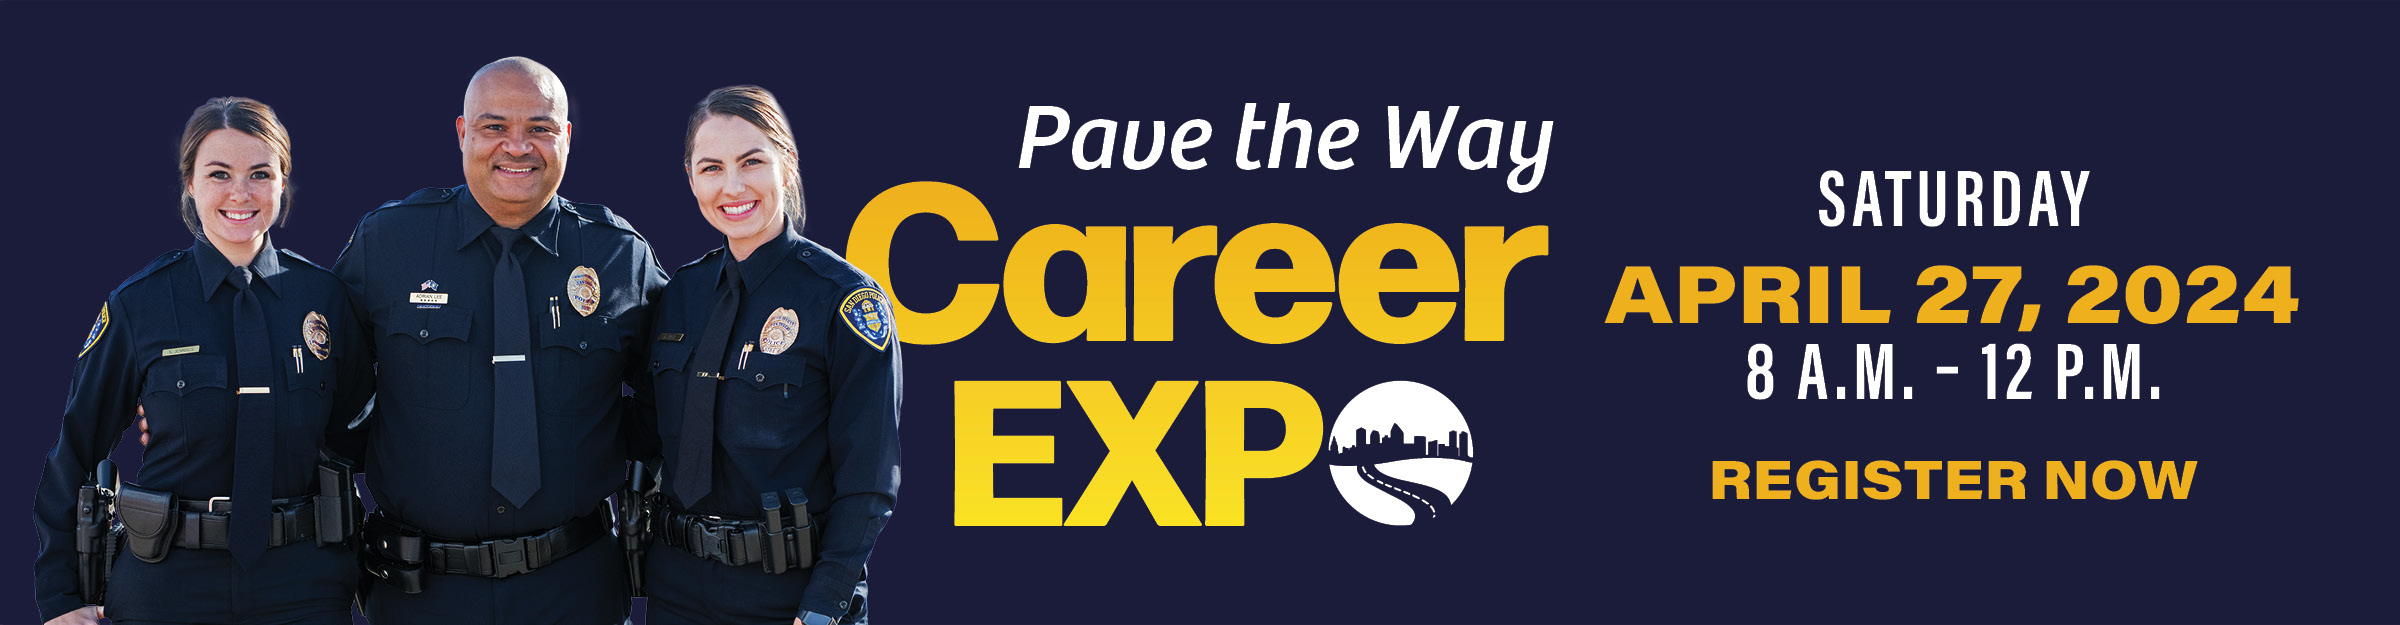 Pave the Way Career Exppo 2024